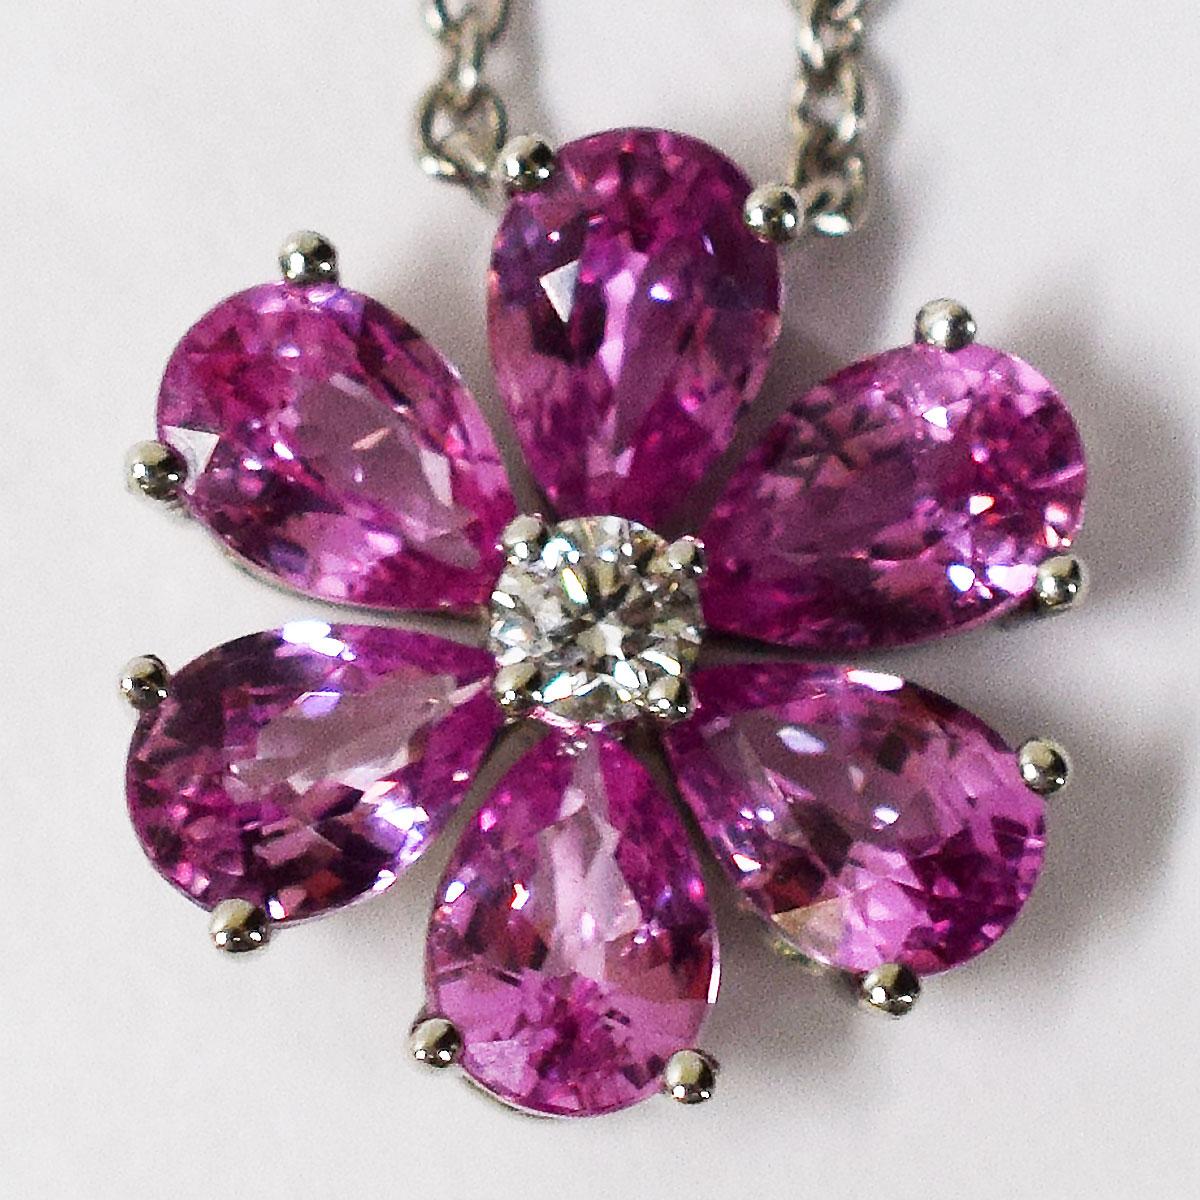 Brand:HARRY WINSTON
Retail Price:JPY913,000YEN（included tax)
Name:Forget Me Not By Harry Winston Pendant
Material:Pear Shape Pink Sapphire (S1.47ct), Diamond (D0.04ct), PT950 Platinum
Weight:4.3g（Approx)
neck around:40.5cm / 15.94in（Approx)
Top